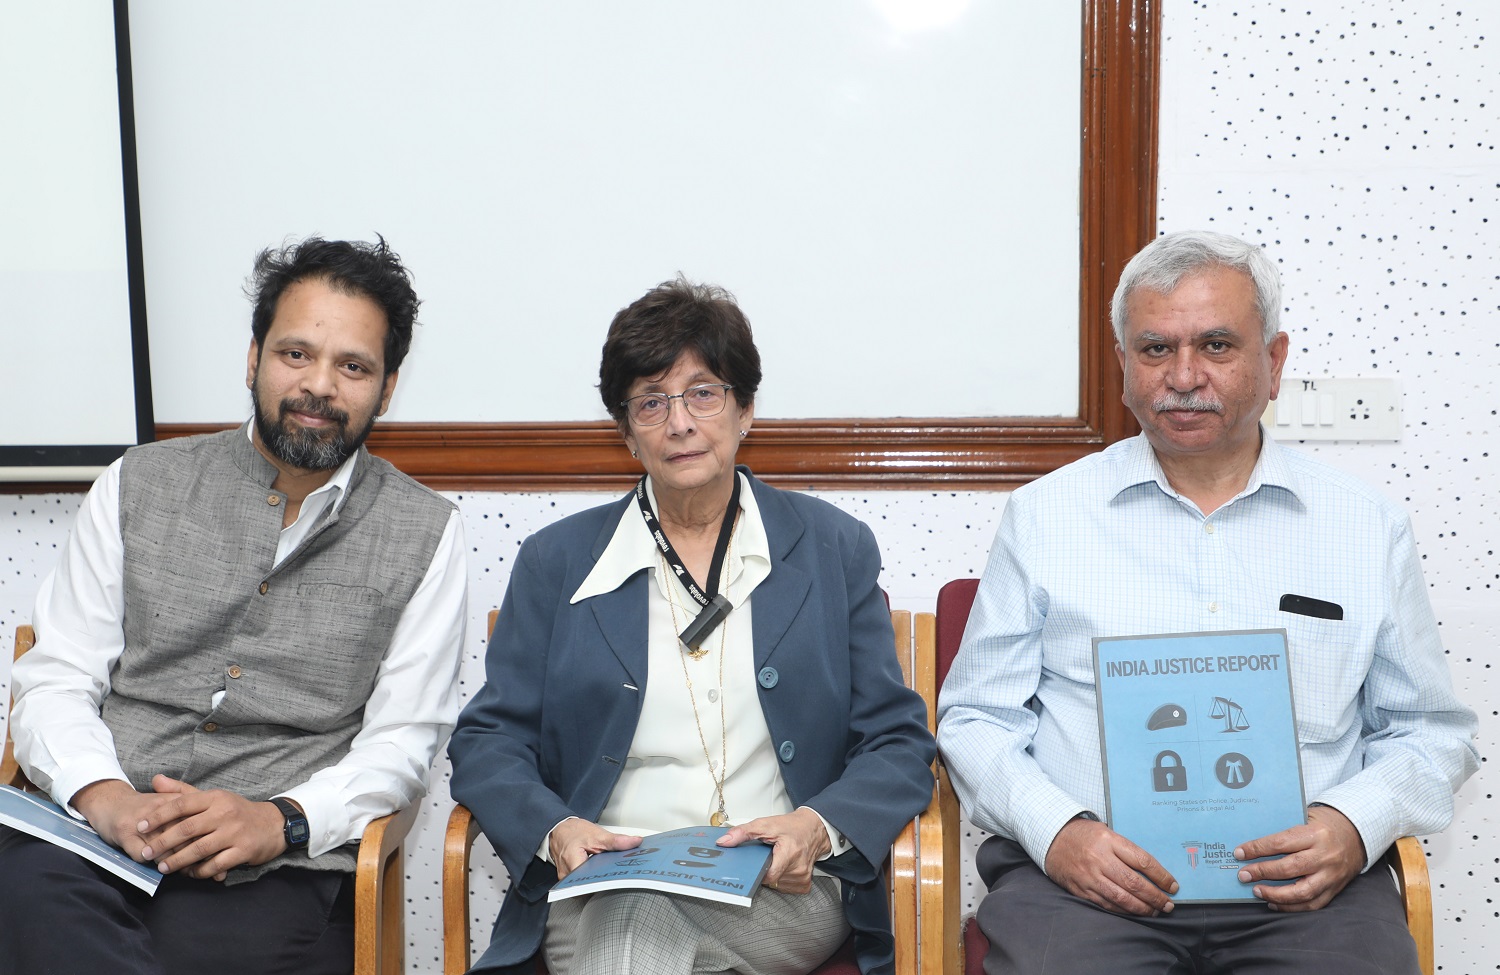 Maja Daruwala (C) and Valay Singh (L), the authors of the India Justice Report for 2022, presented their findings, with Prof. Trilochan Sastry(R) as the moderator, as part of a special talk hosted by the Centre for Public Policy at IIM Bangalore on 20 January 2023.